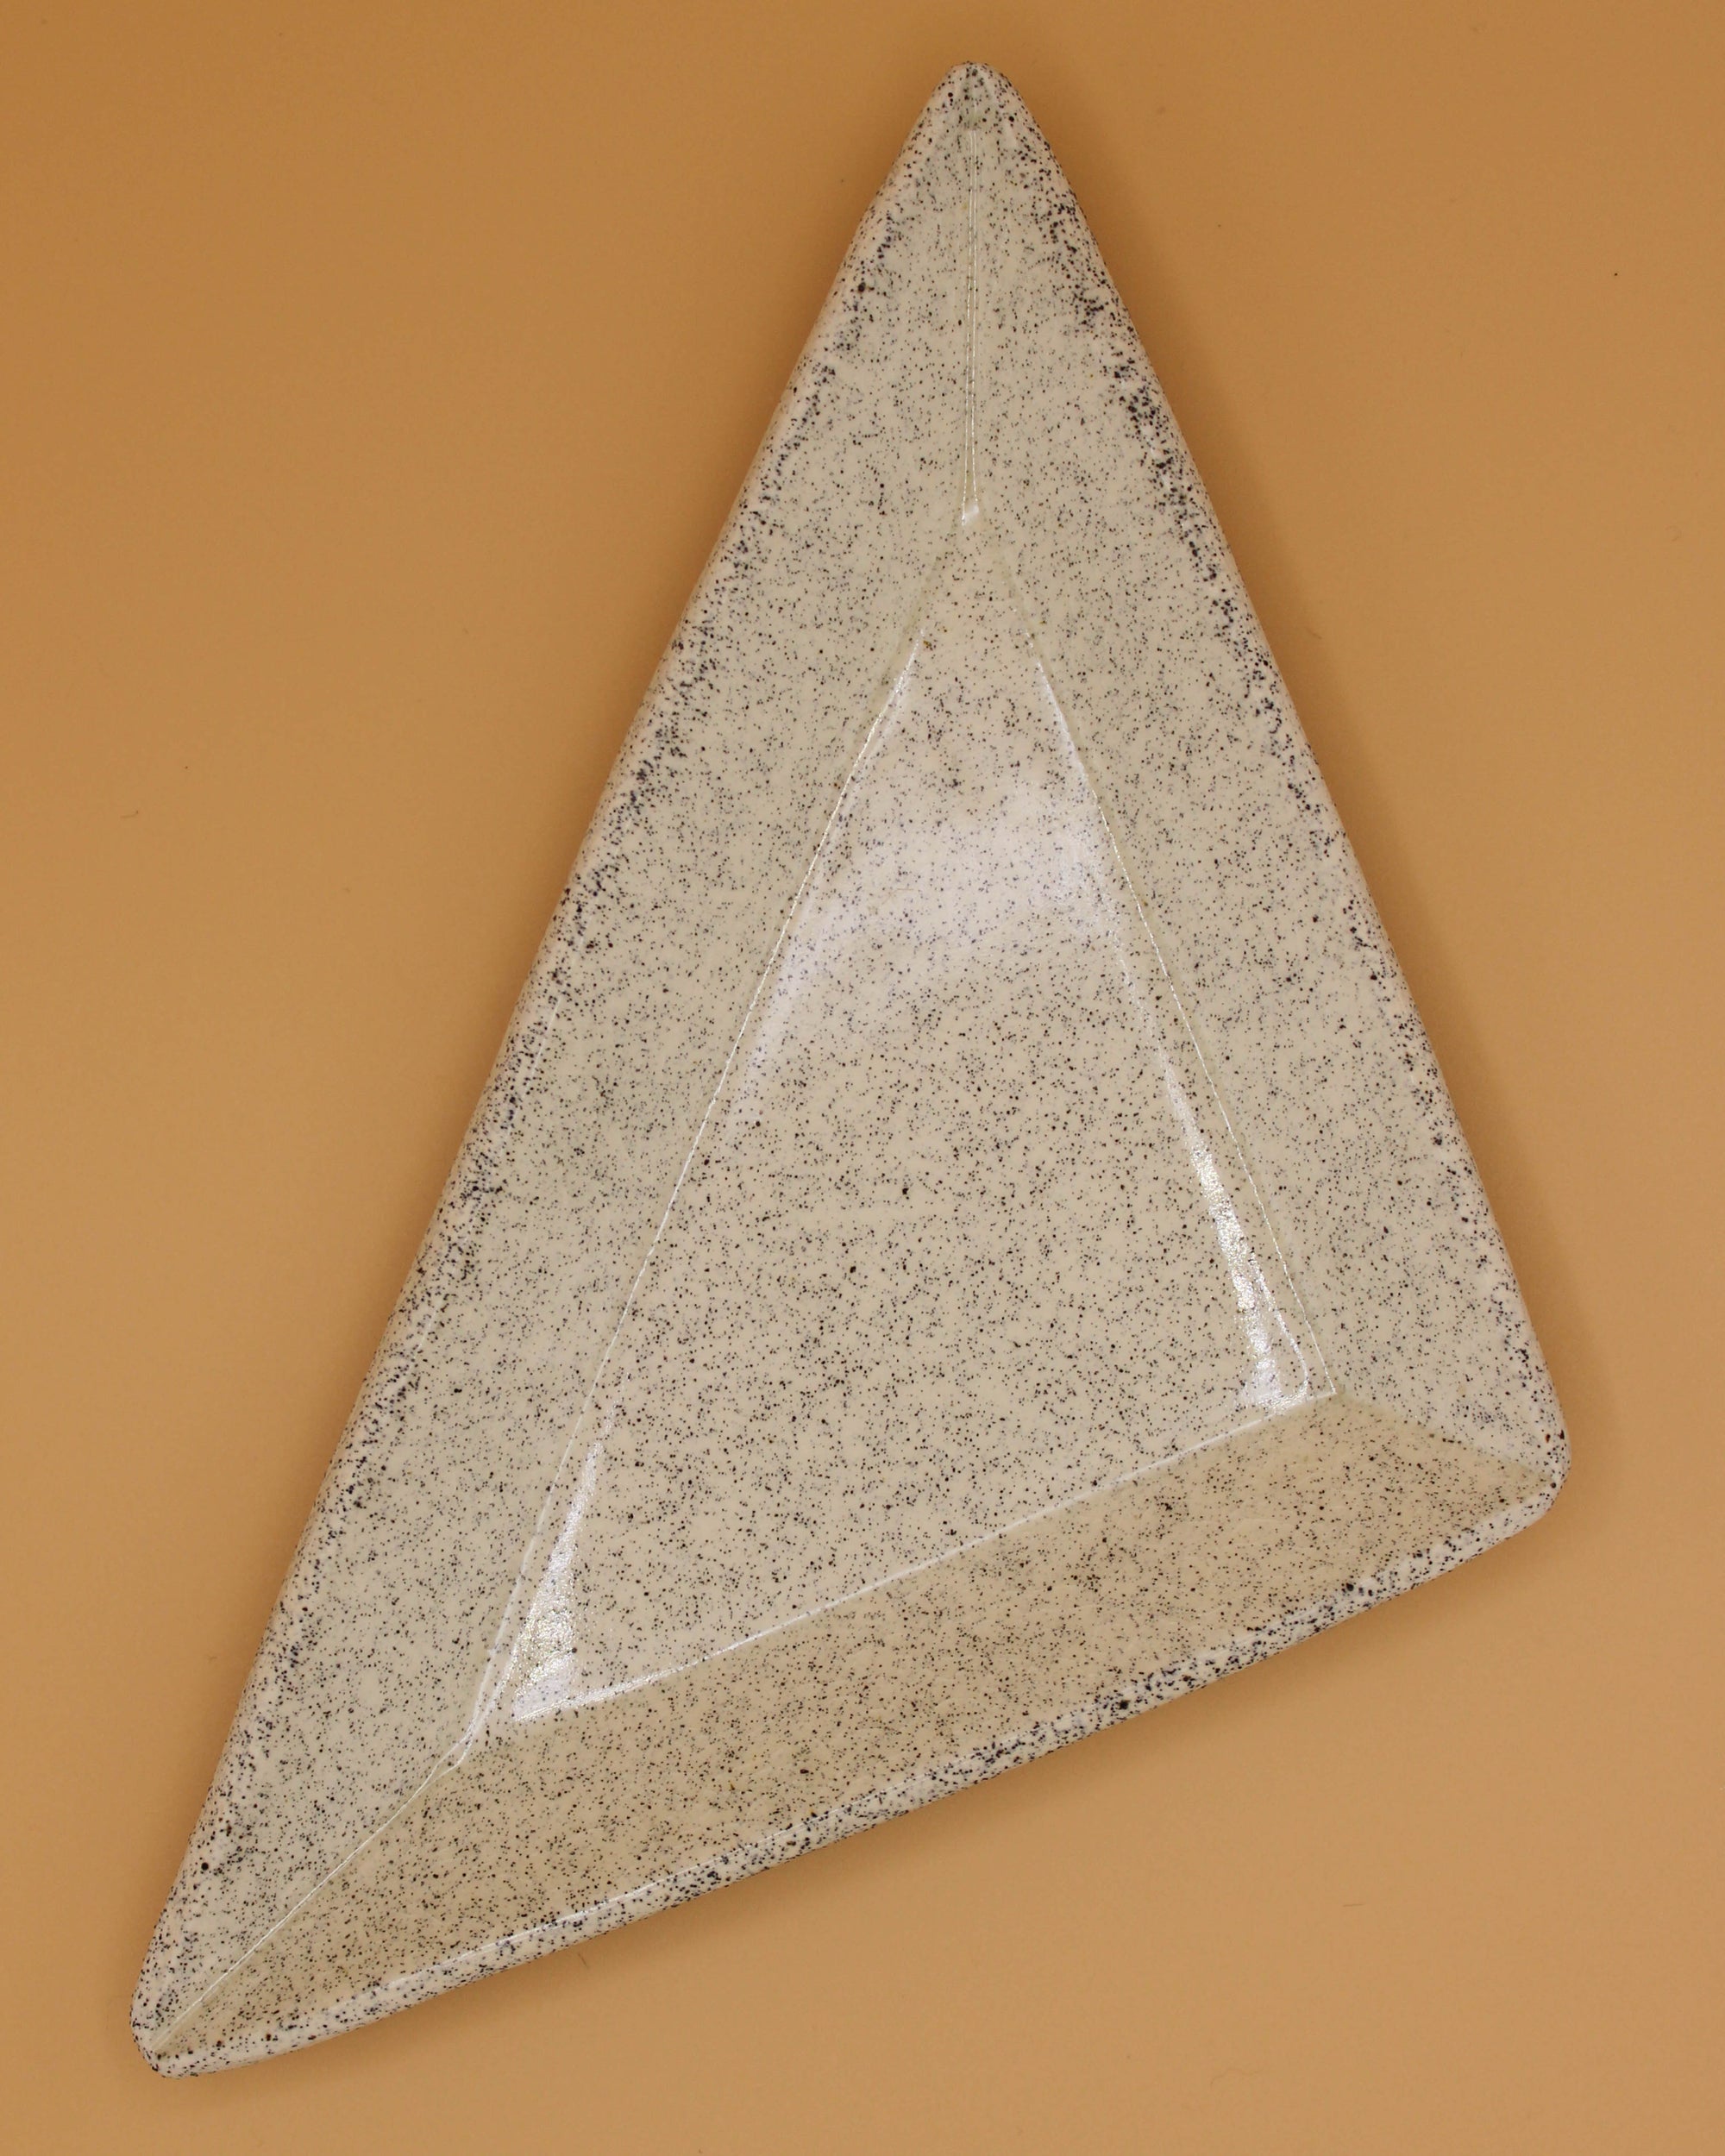 Salt and Pepper Triangle Tray